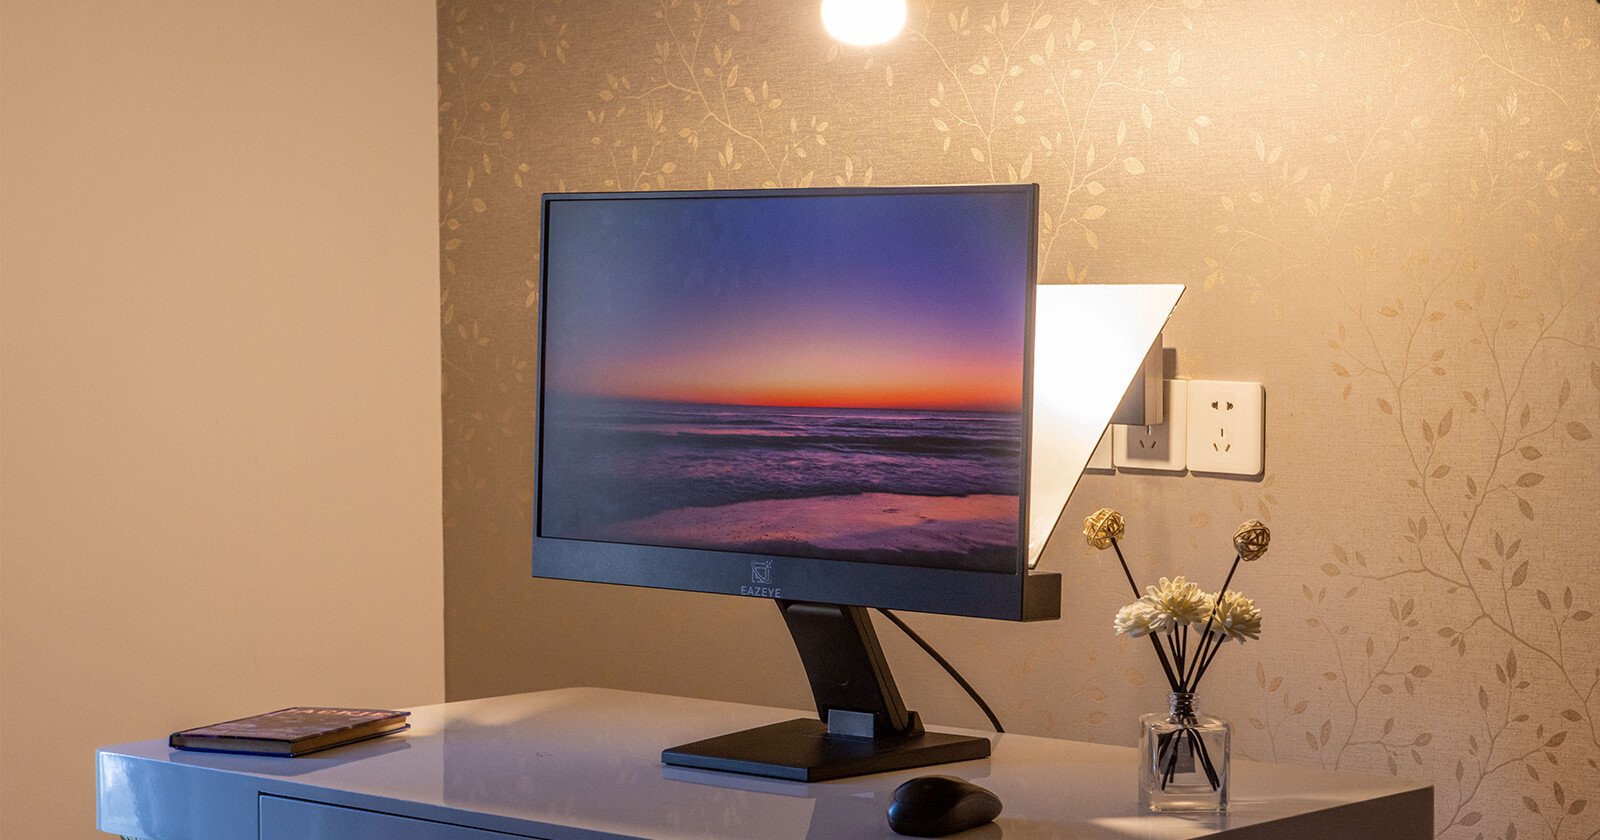 The Eazeye is an Naturally Backlit Monitor Powered by Ambient Light